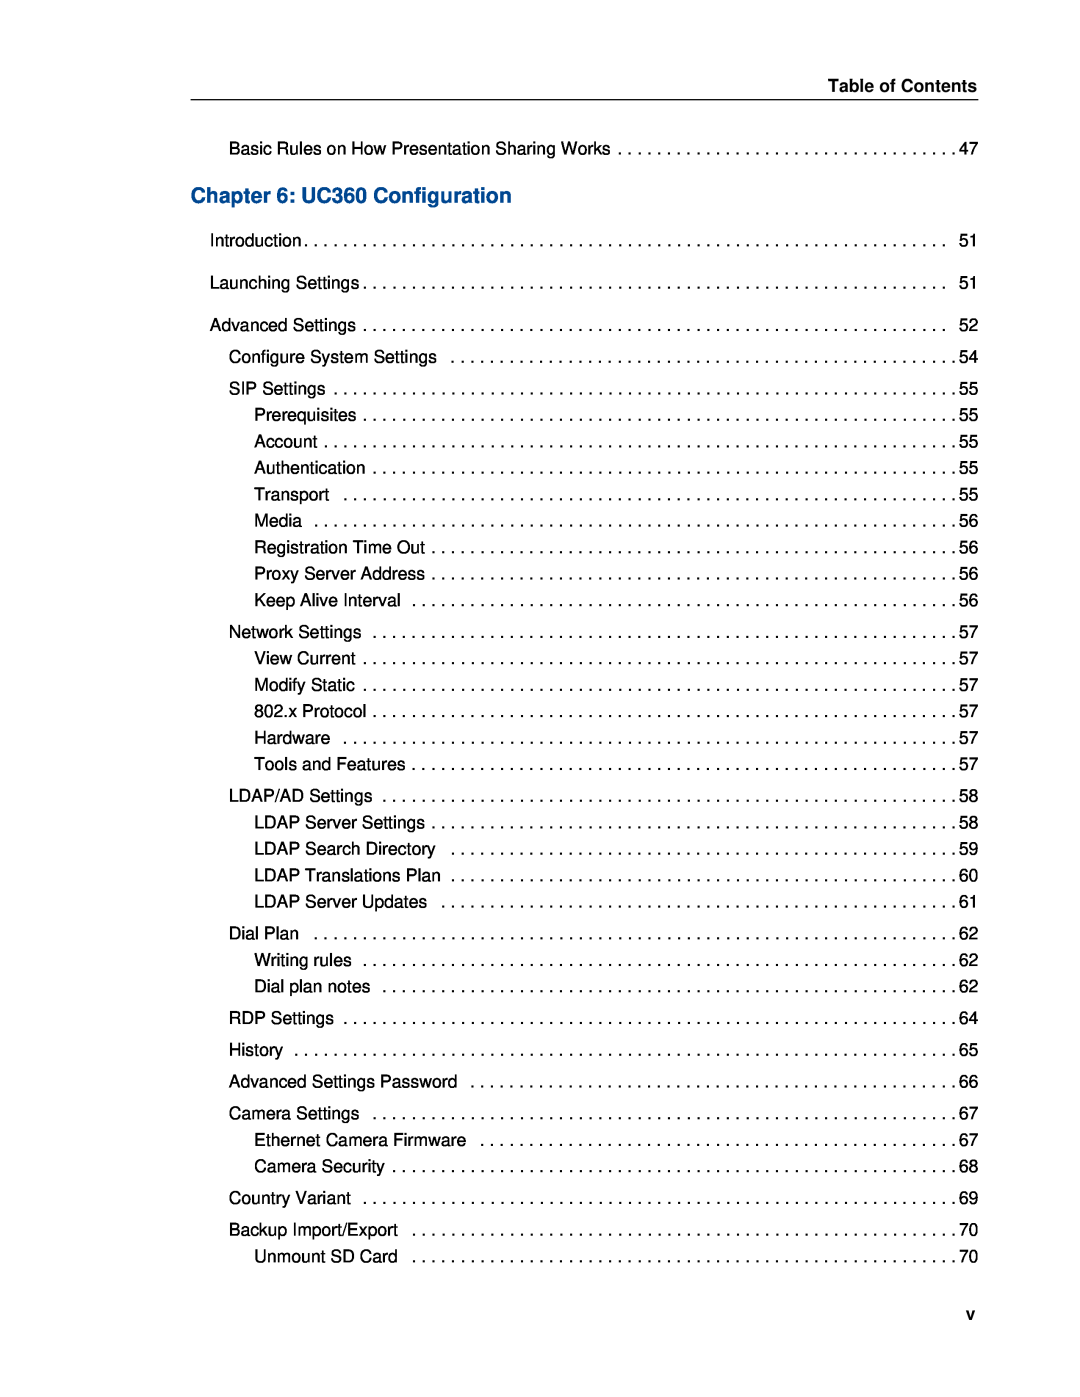 Mitel manual UC360 Configuration, Table of Contents 